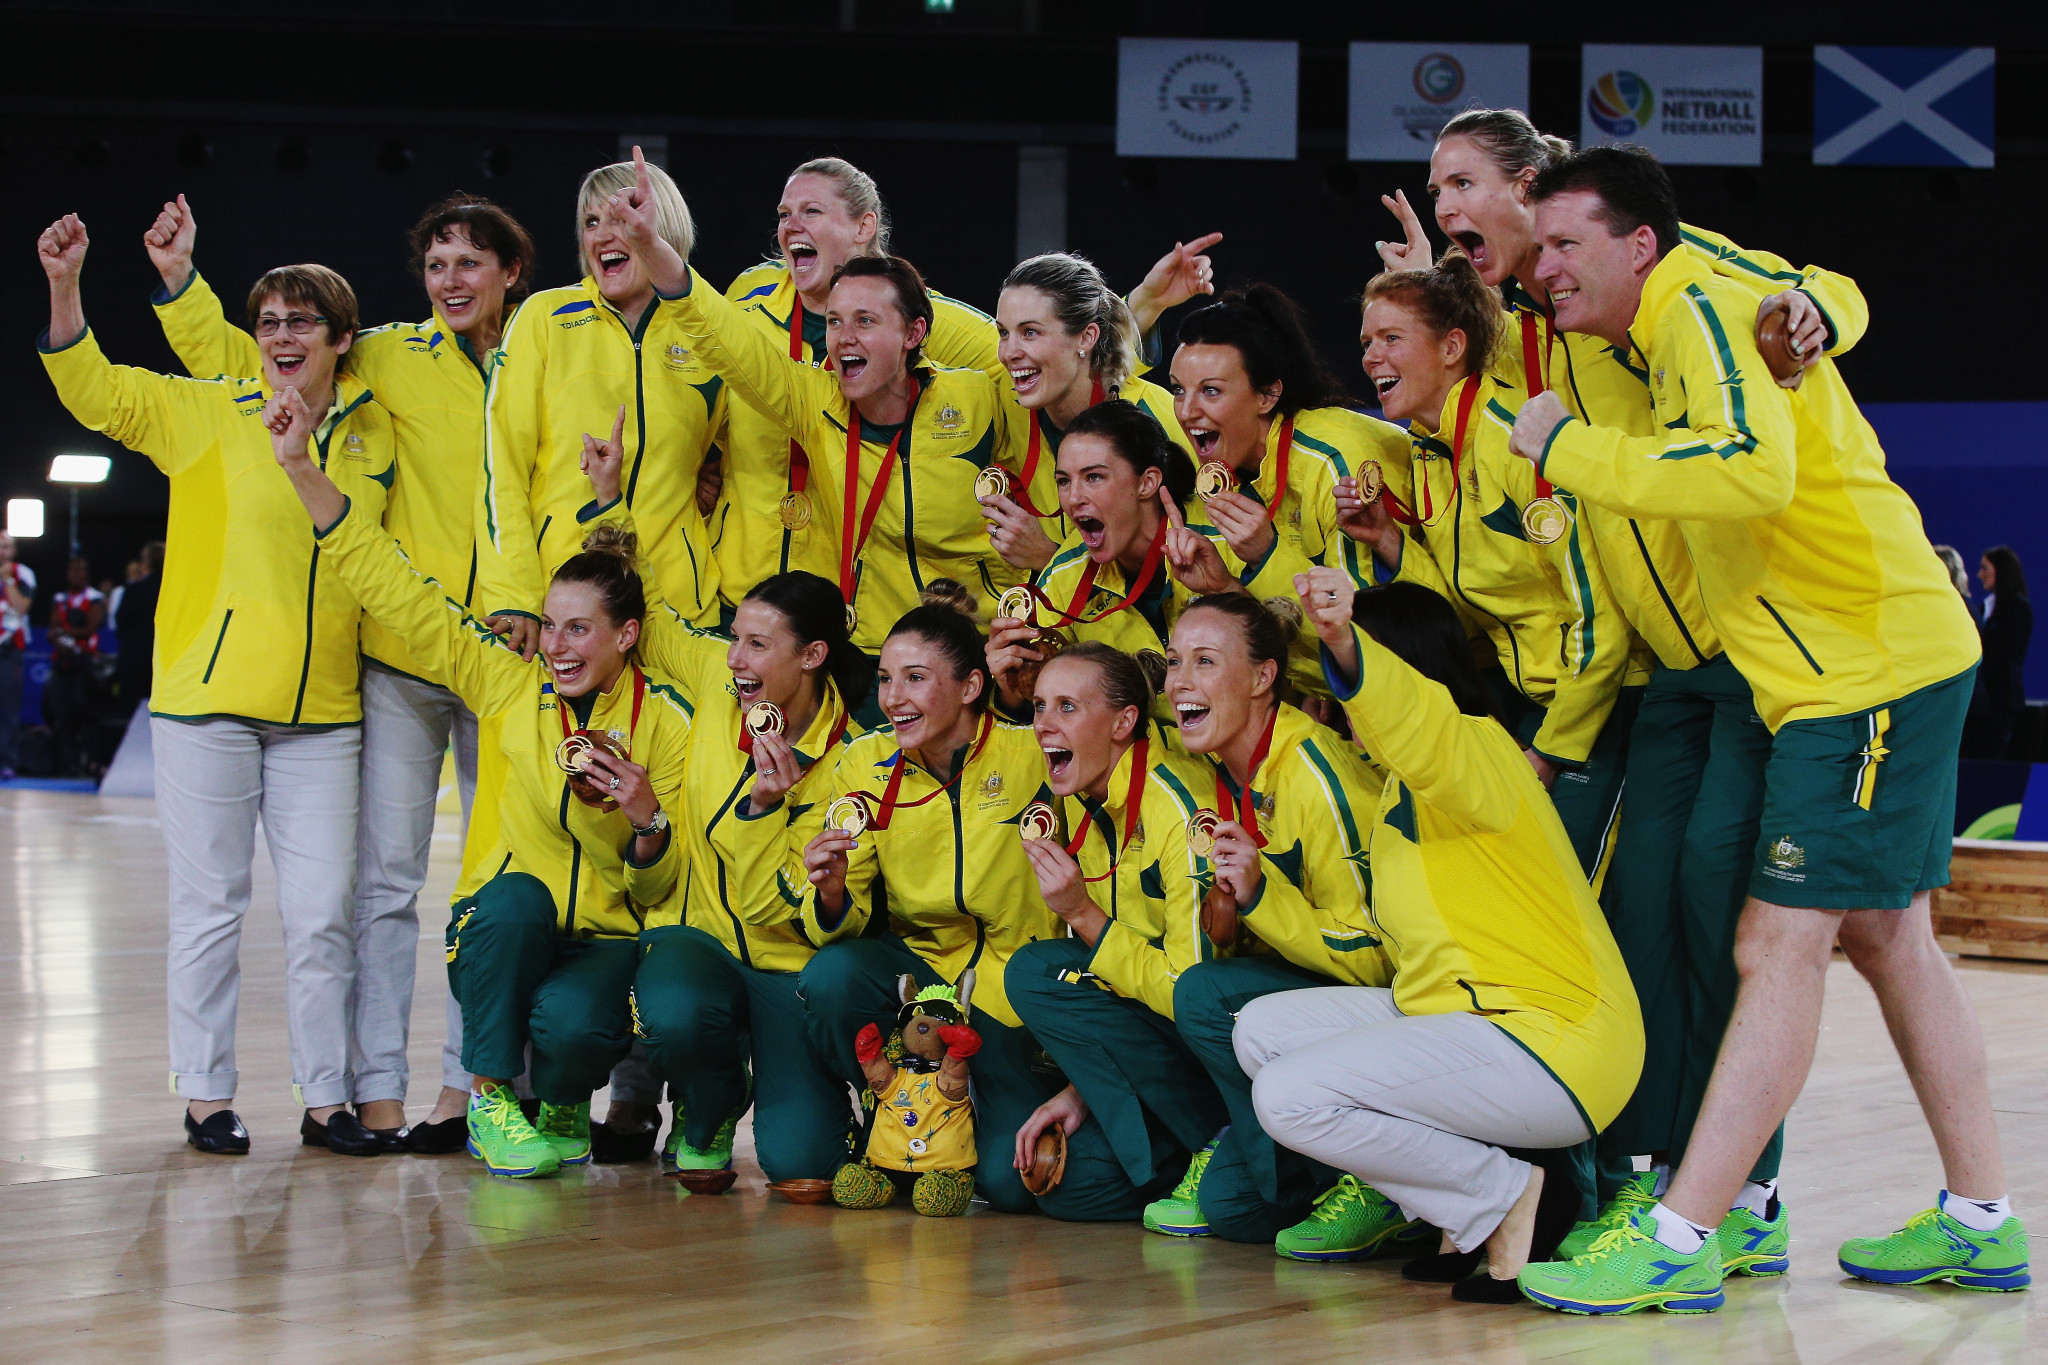 Australia won the Commonwealth Games gold medal in the netball tournament at Glasgow 2014 ©Getty Images